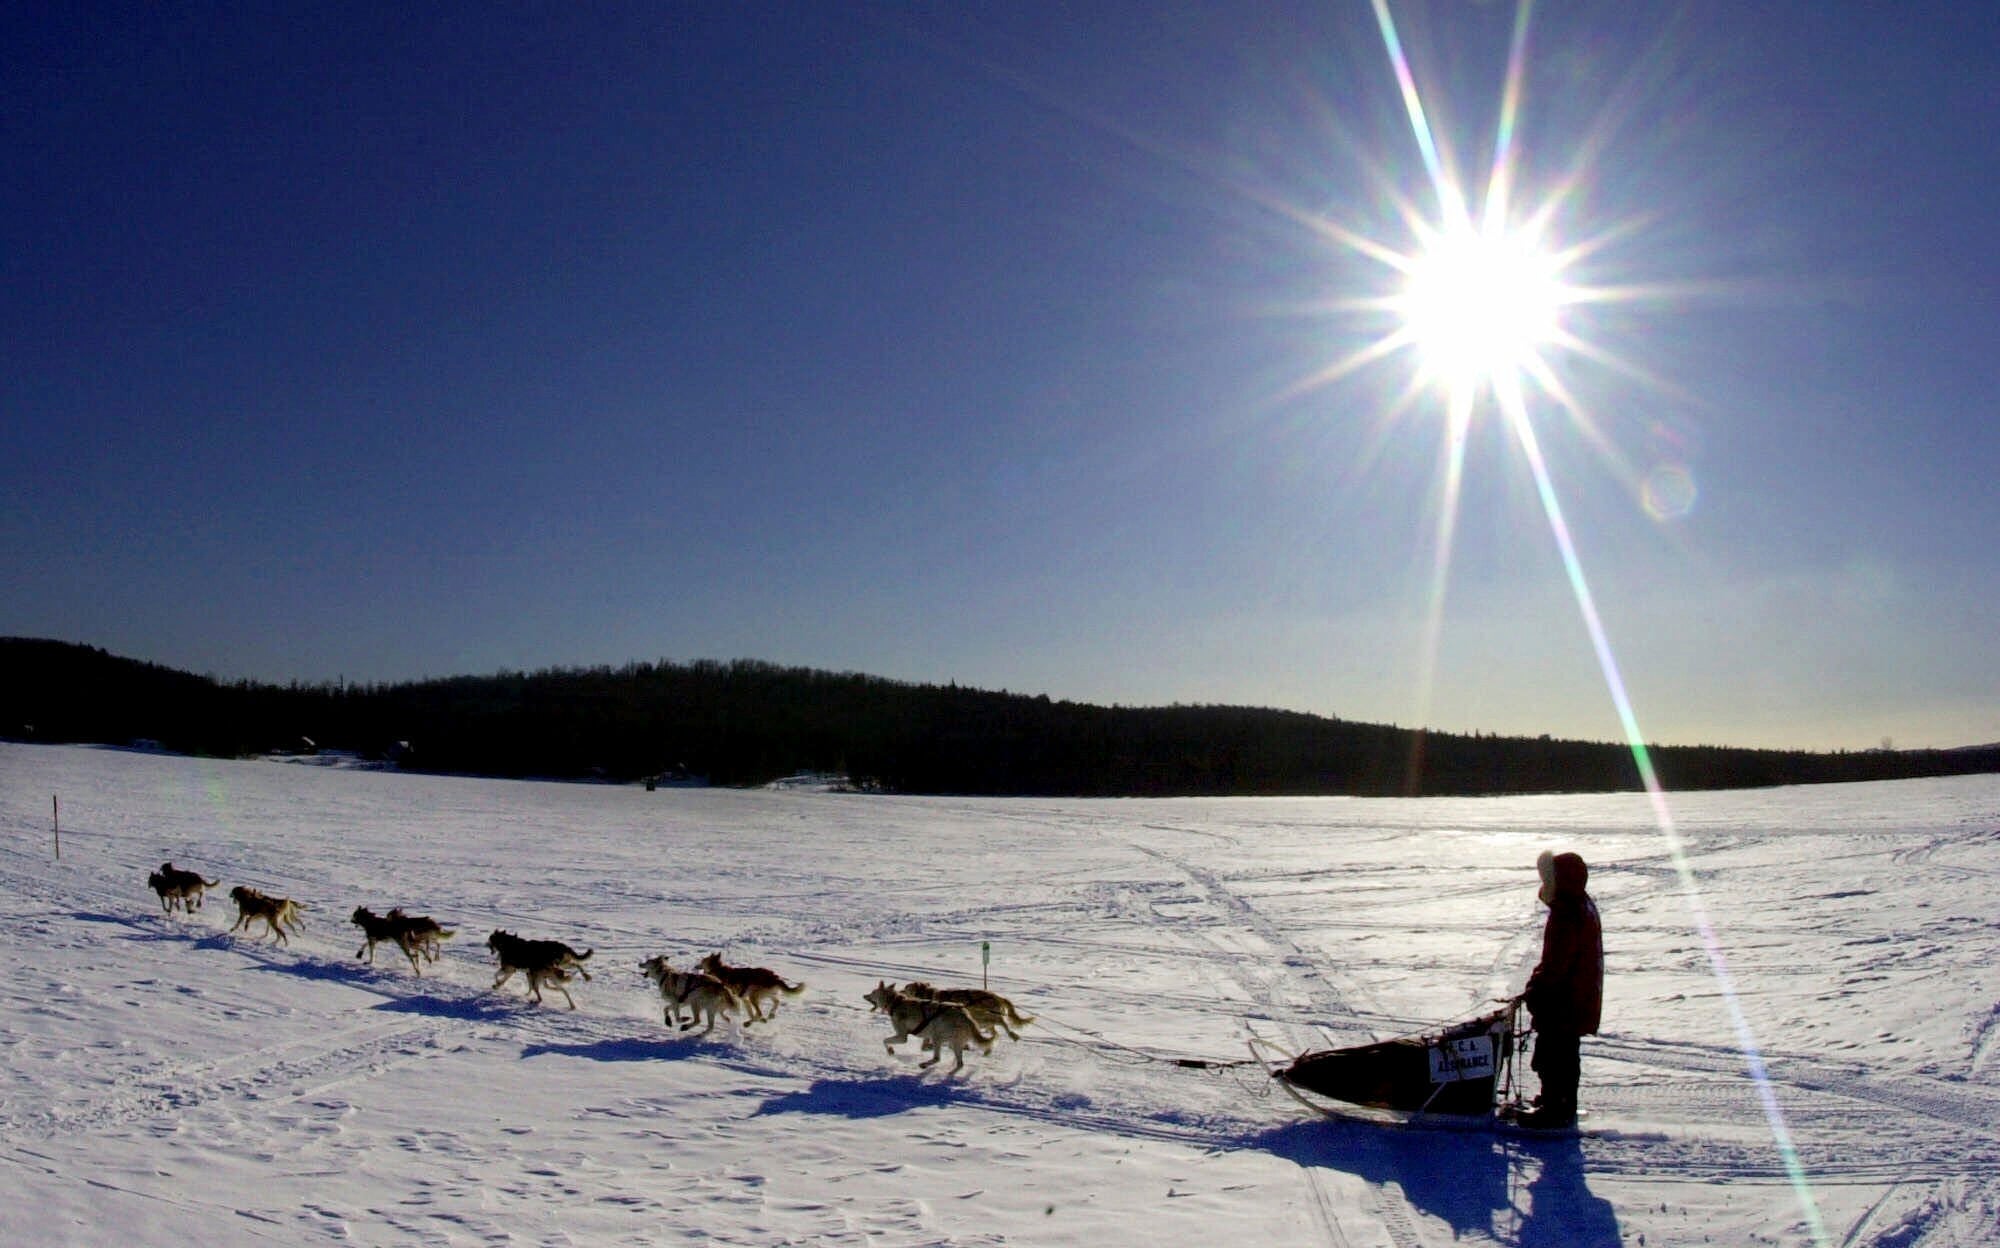 Musher Keith Aili and his sled dog team cross Portage Lake in Portage, Maine